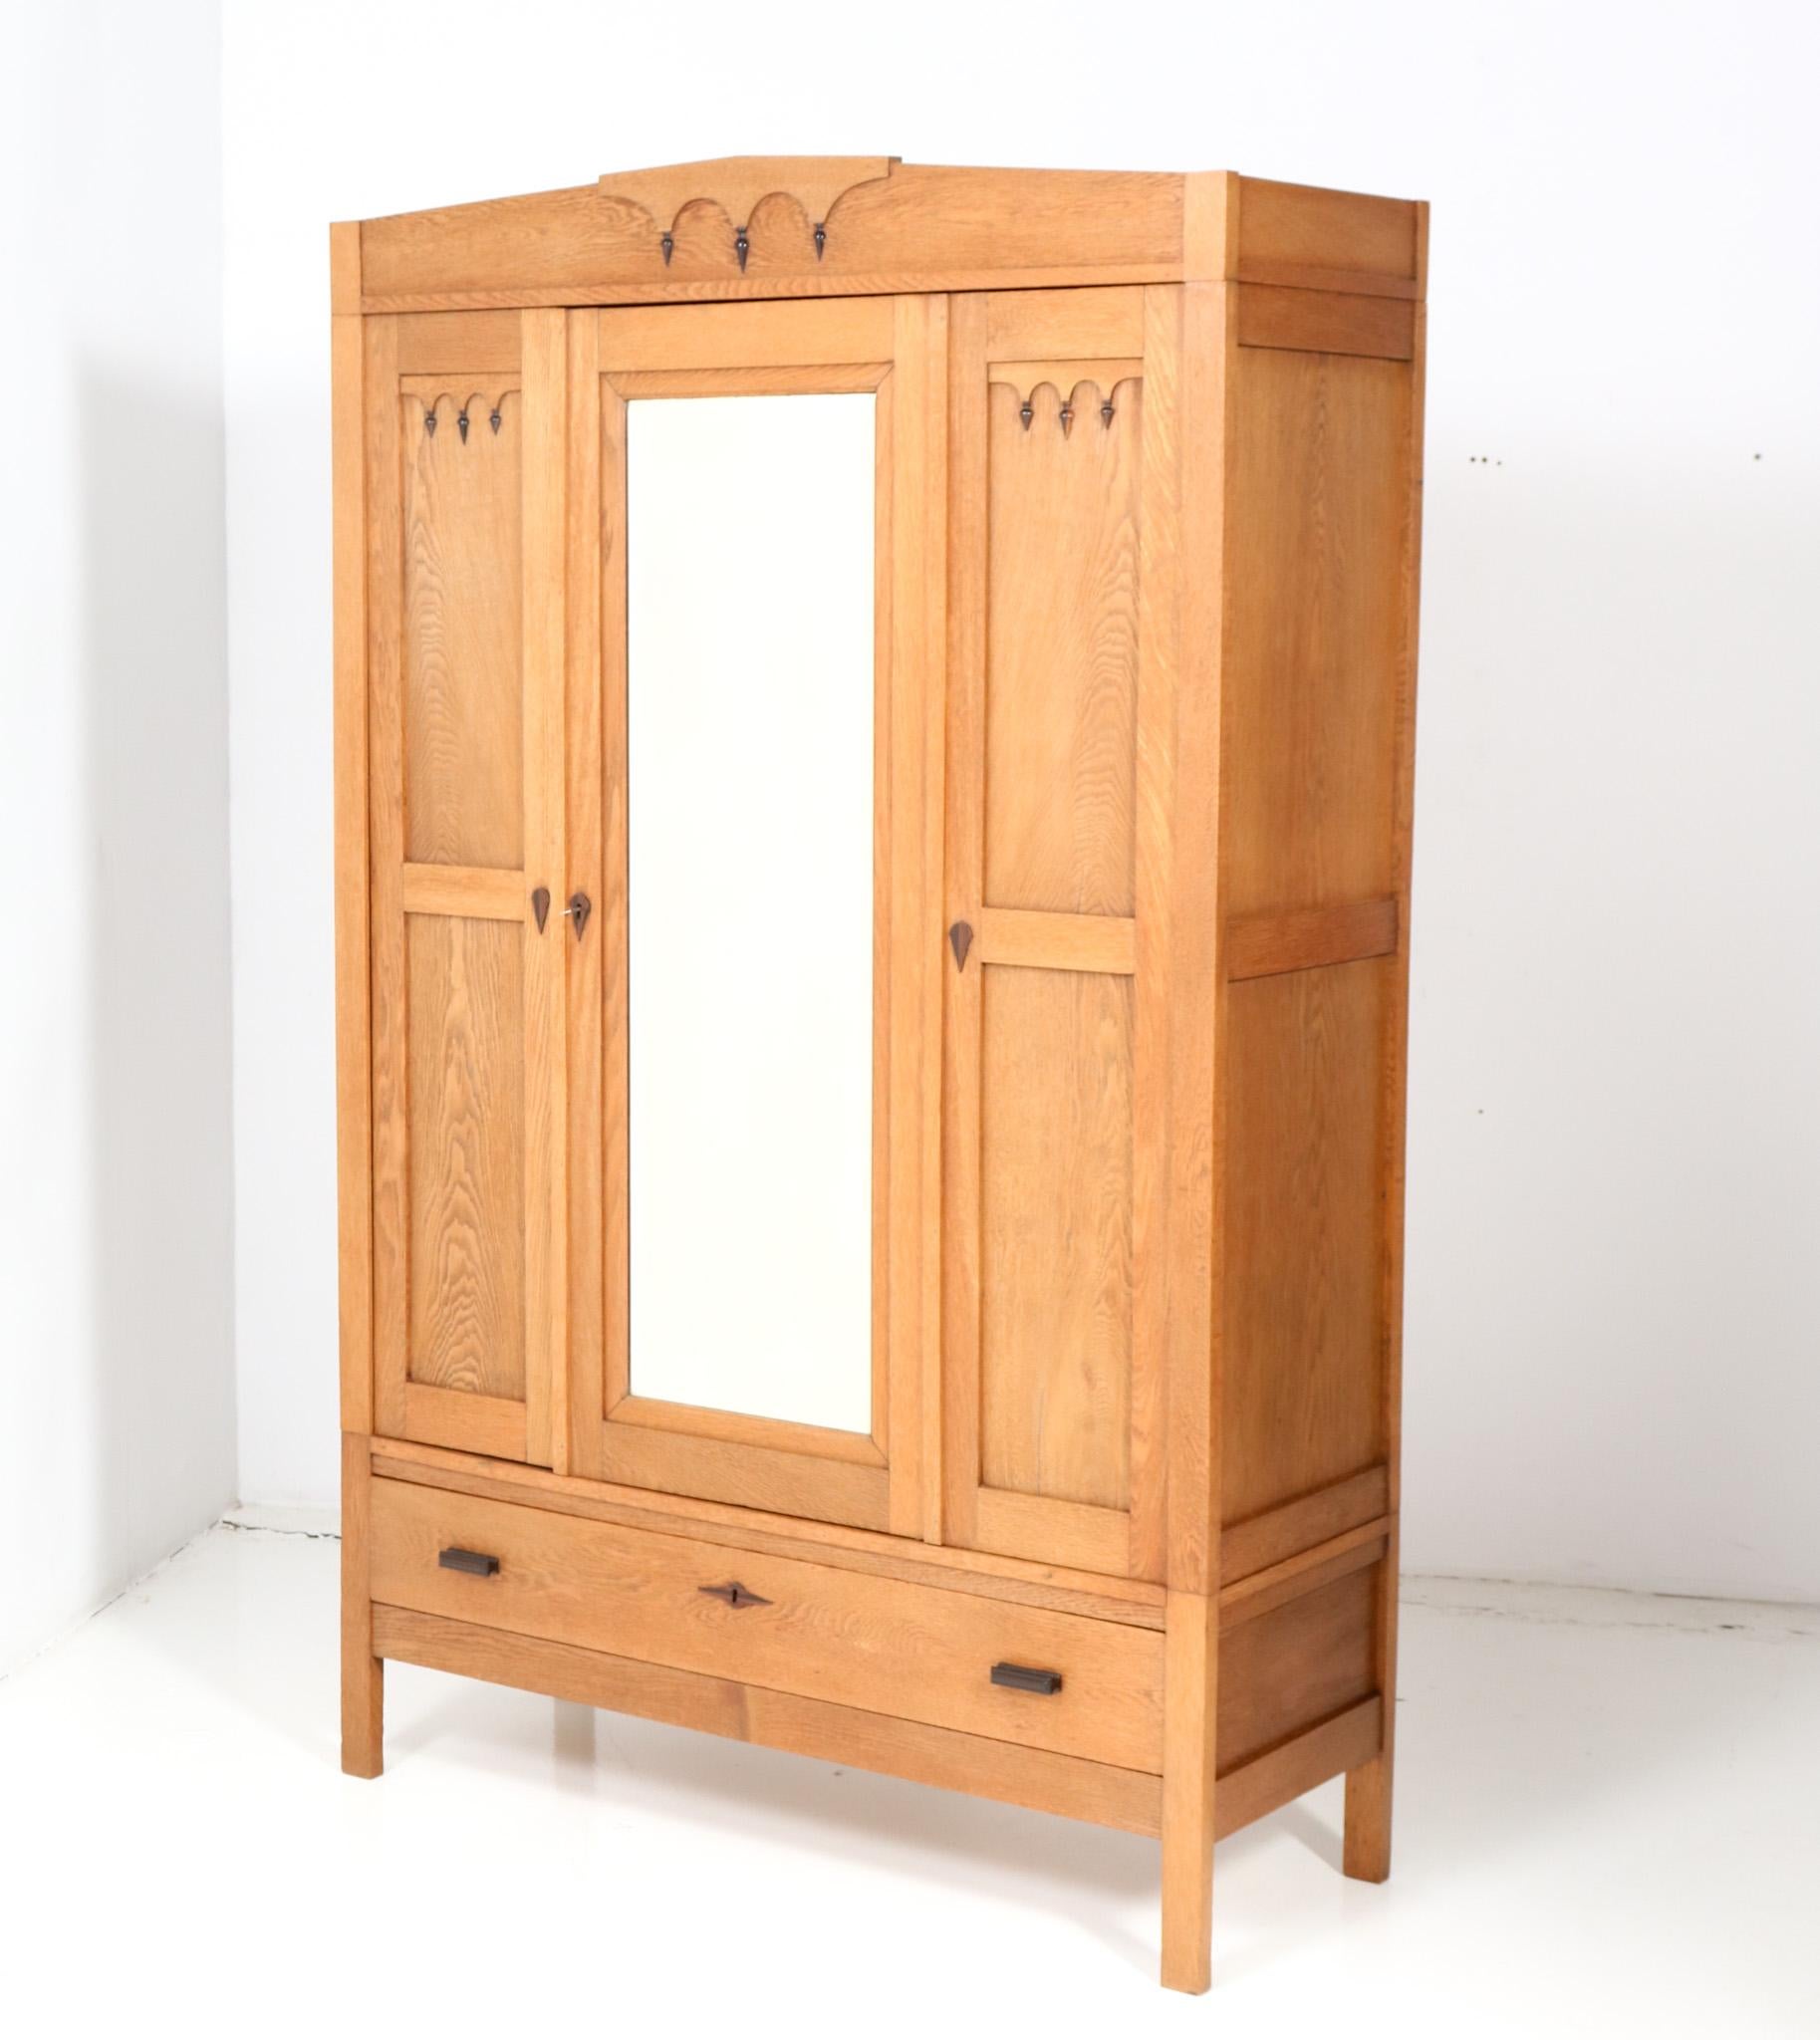 Amazing and rare Art Deco Amsterdam’s School wardrobe or armoire.
Striking Dutch design from the 1920s.
Solid oak and original oak veneered base with solid Macassar ebony handles and elements.
The drawer has also solid Macassar ebony handles.
In